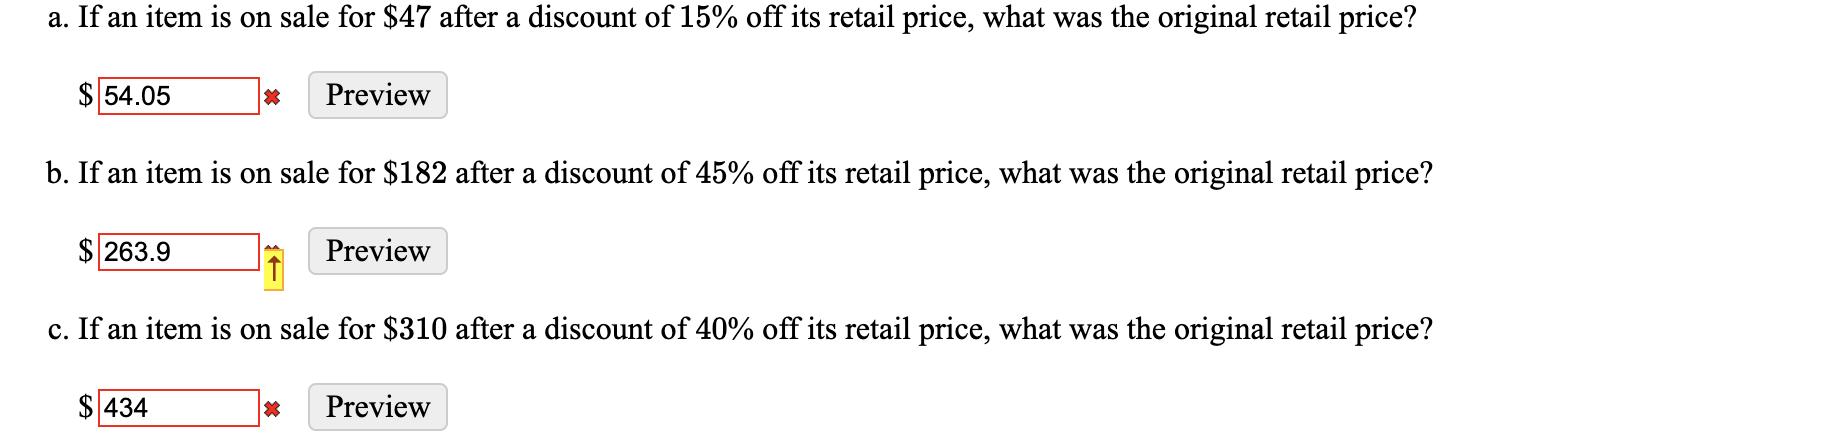 a. If an item is on sale for $47 after a discount of 15% off its retail price, what was the original retail price?$ 54.05Pr